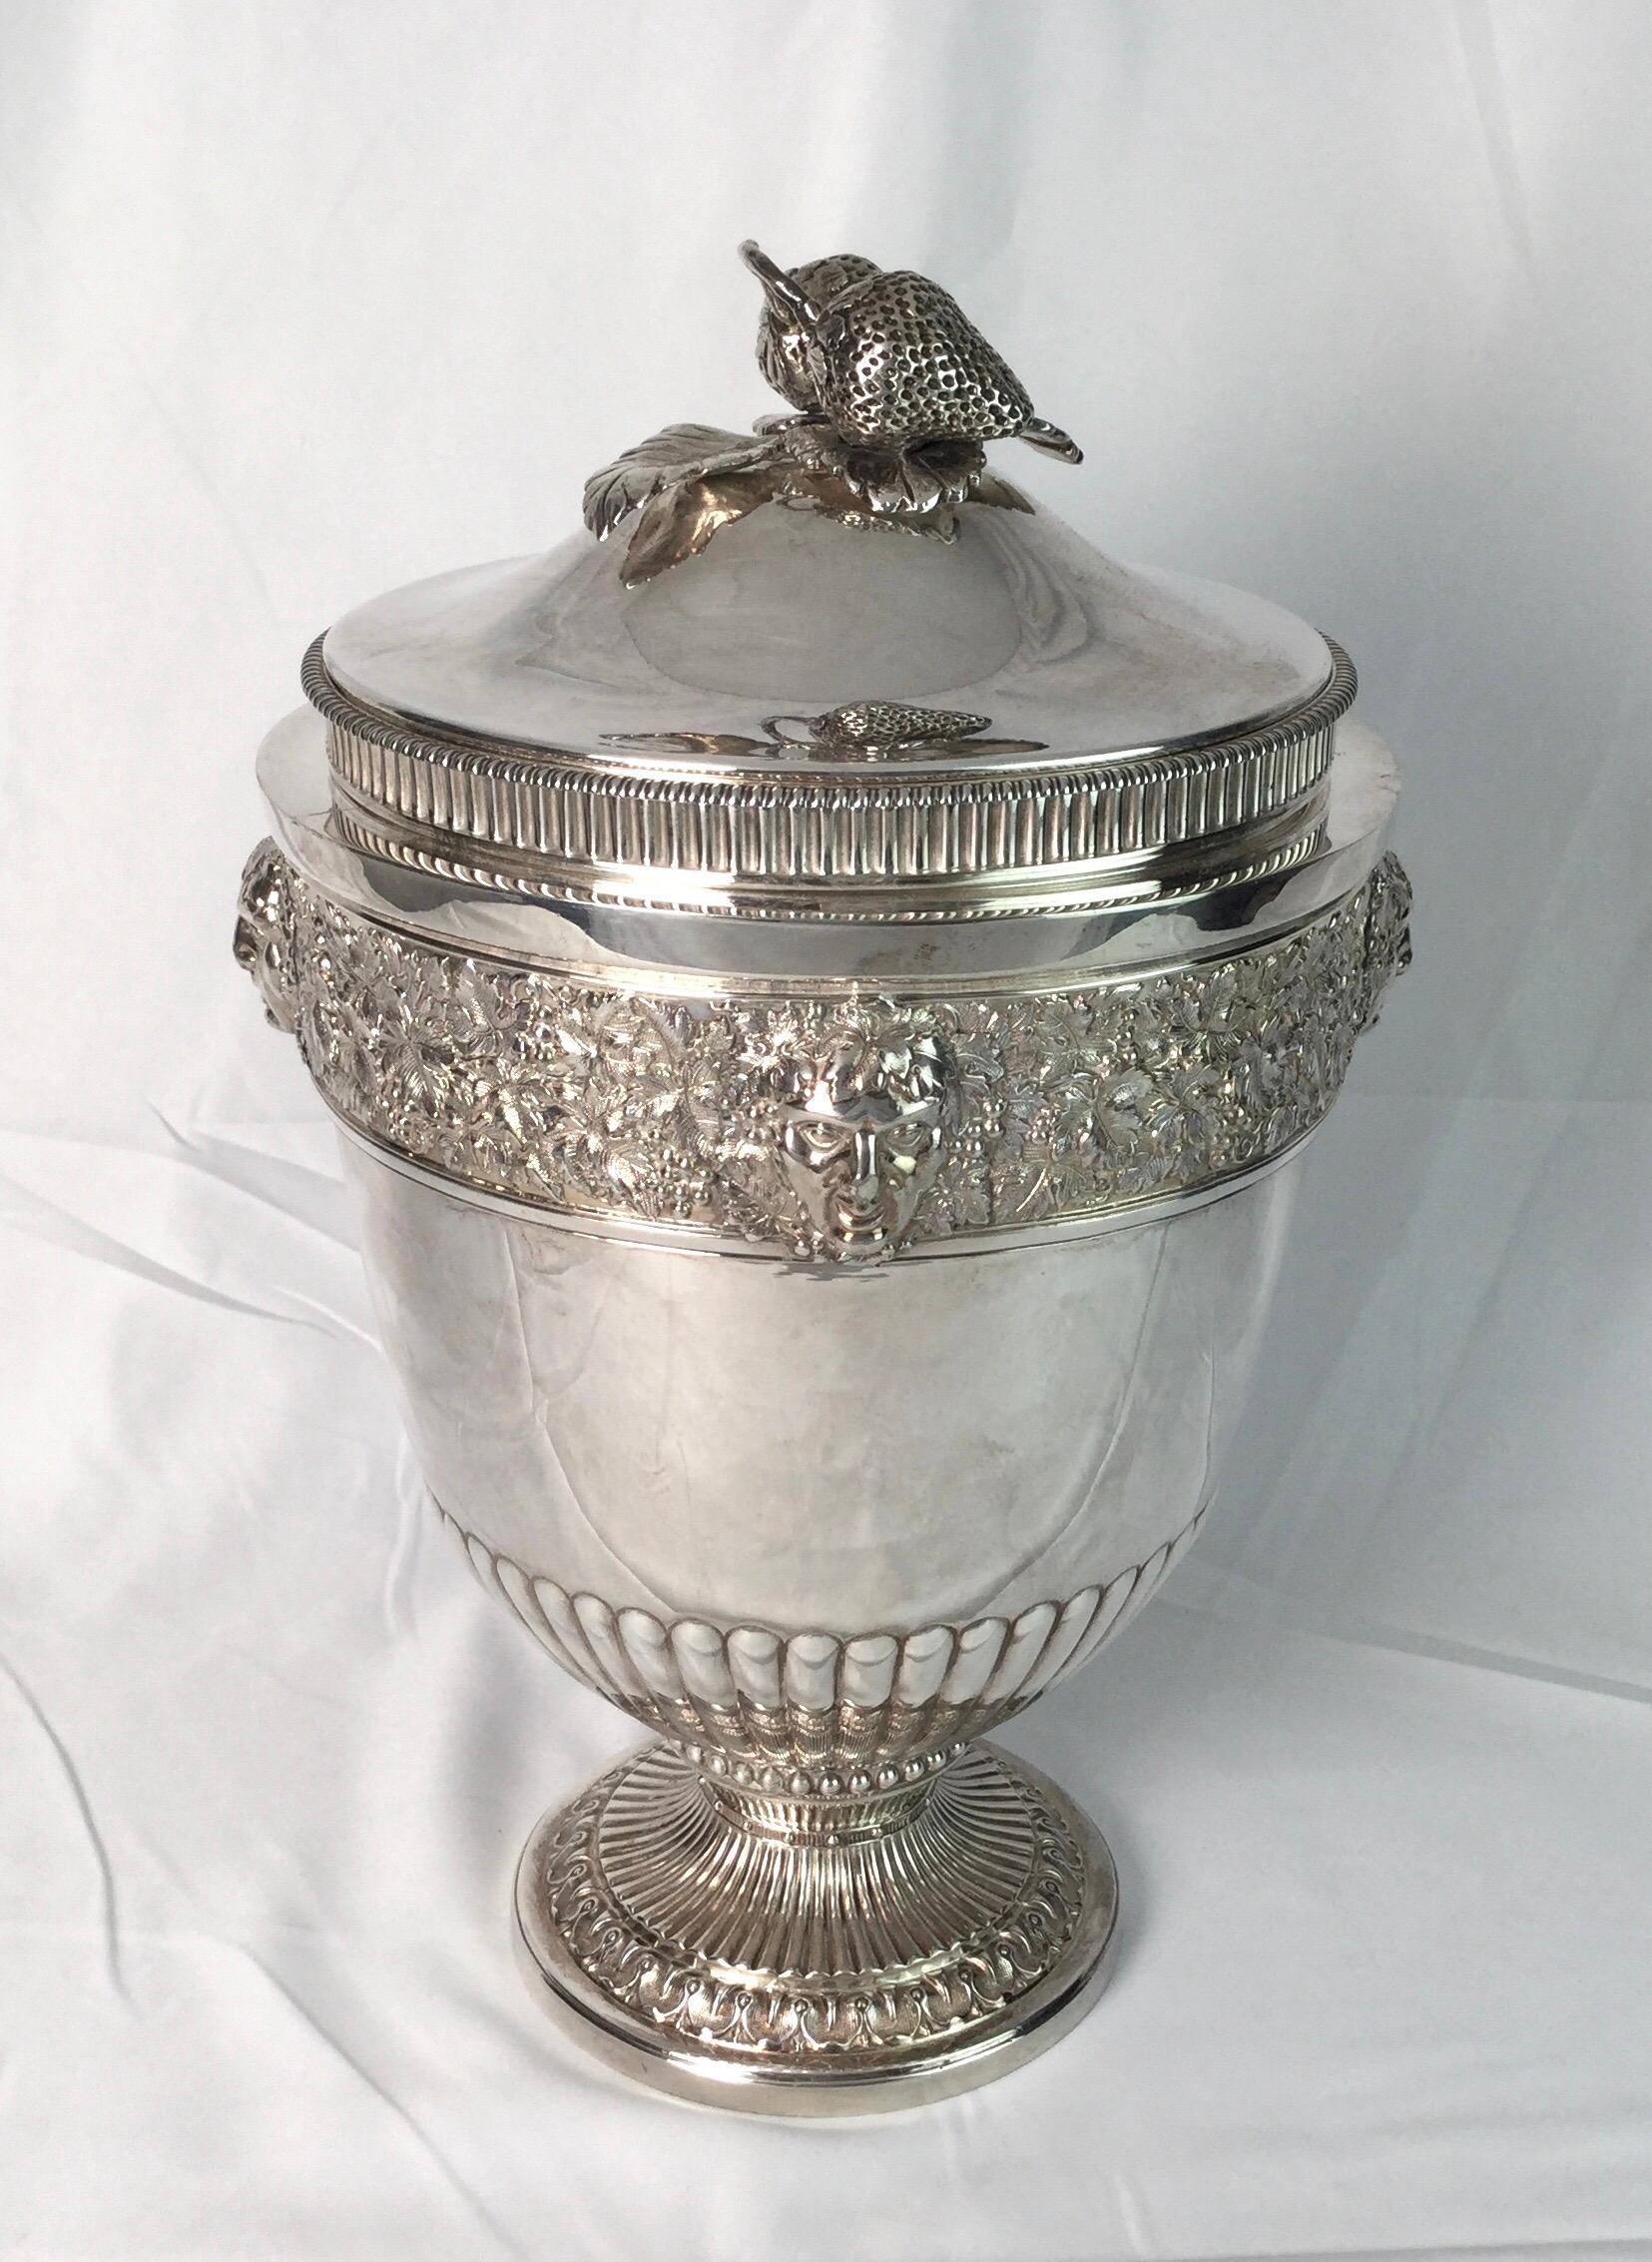 A classic urn form ice bucket or wine cooler with a liner, England, circa 1900. The urn form with a finial on the lid of strawberries and leaves, the body at the top with cast decoration of grape leaves and masks of bacchanalia. The pedestal base